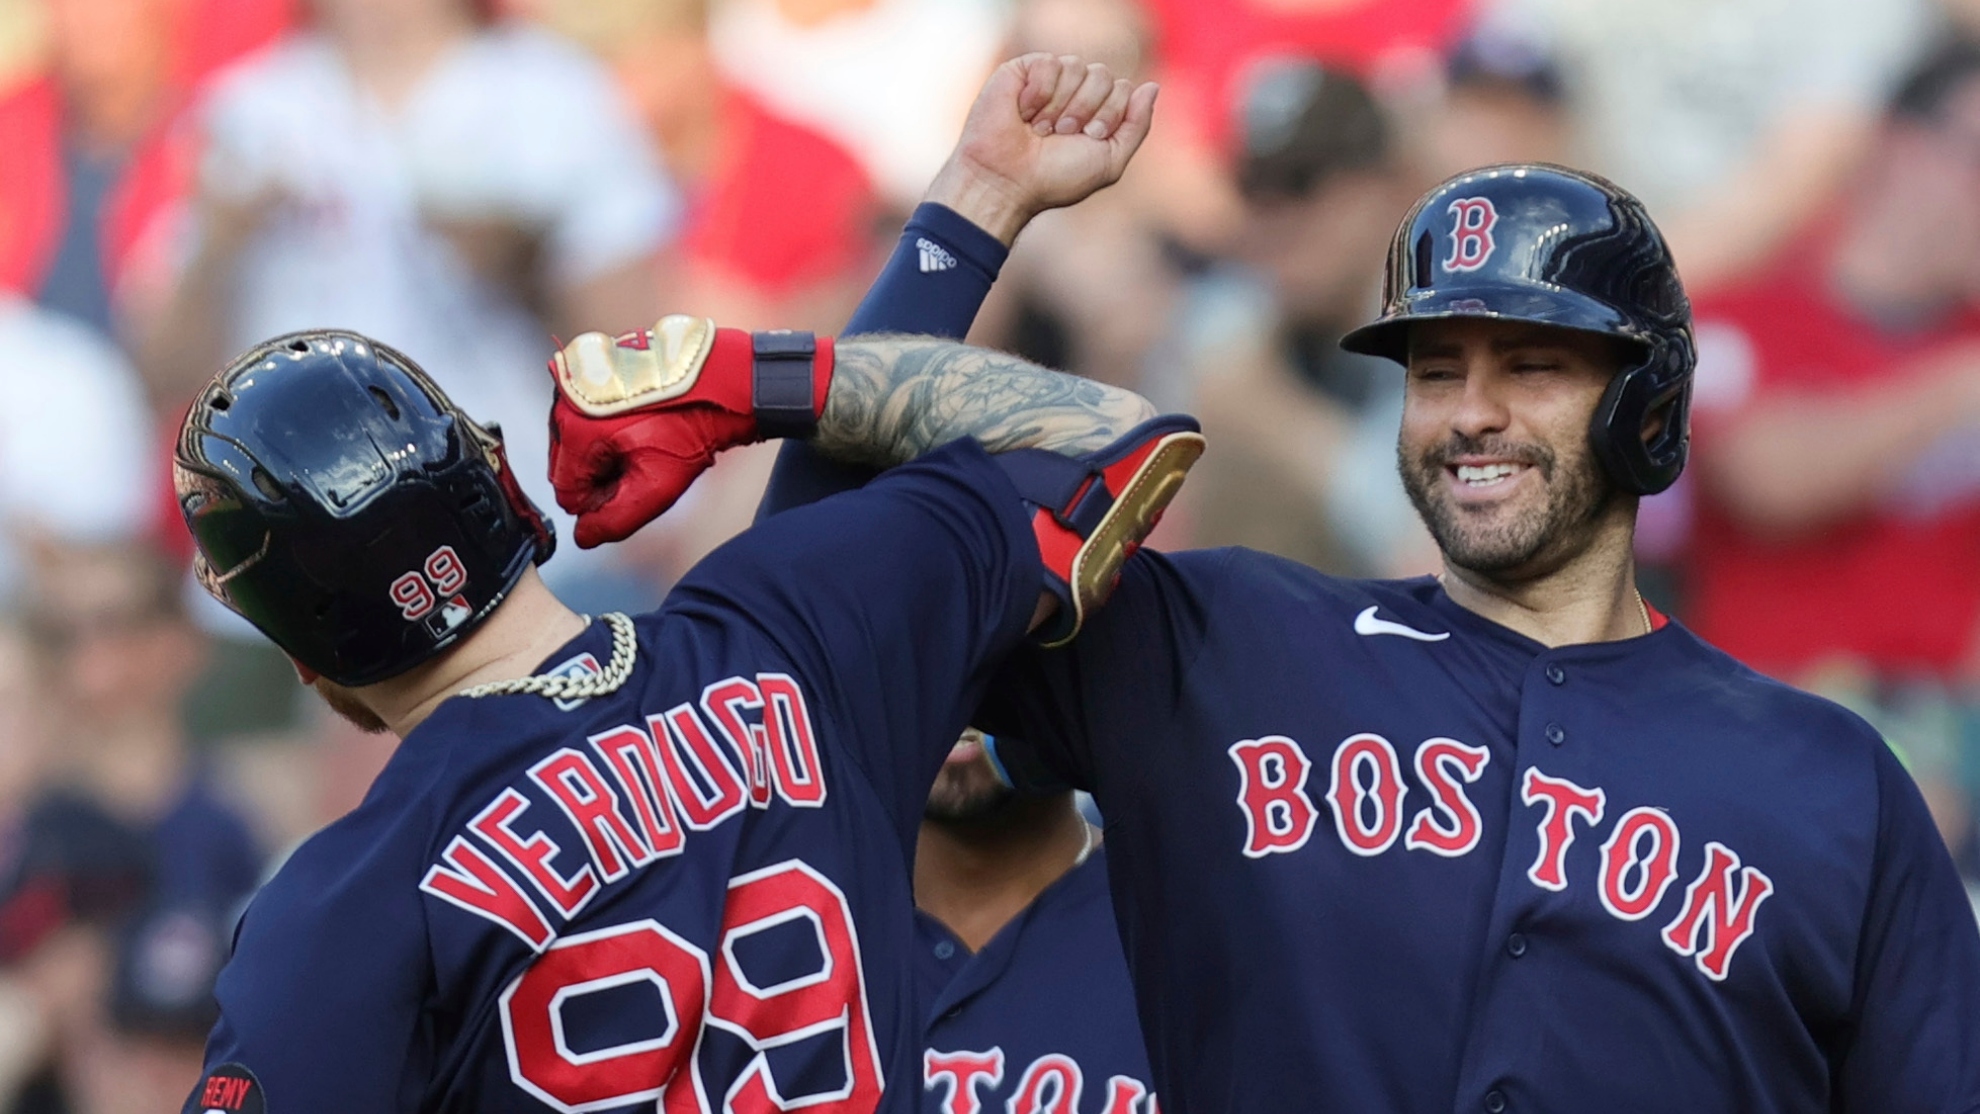 Boston Red Sox's J.D. Martinez, right, celebrates a three-run home run by Alex Verdugo (99) against the Cleveland Guardians during the sixth inning of a baseball game Saturday, June 25, 2022, in Cleveland. (John Kuntz/Cleveland.com via AP)